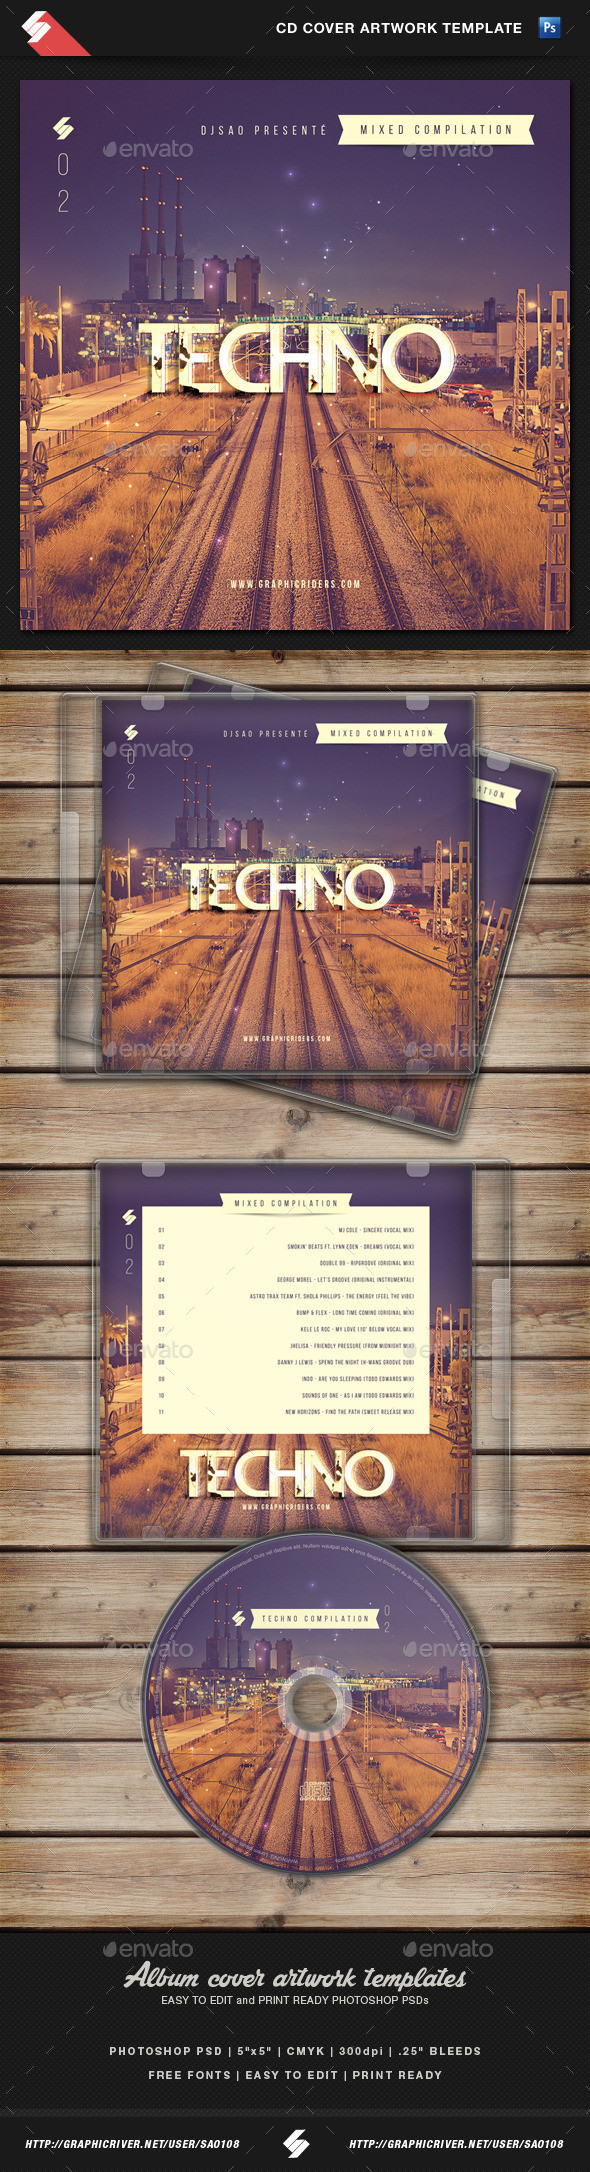 Techno cd cover template preview